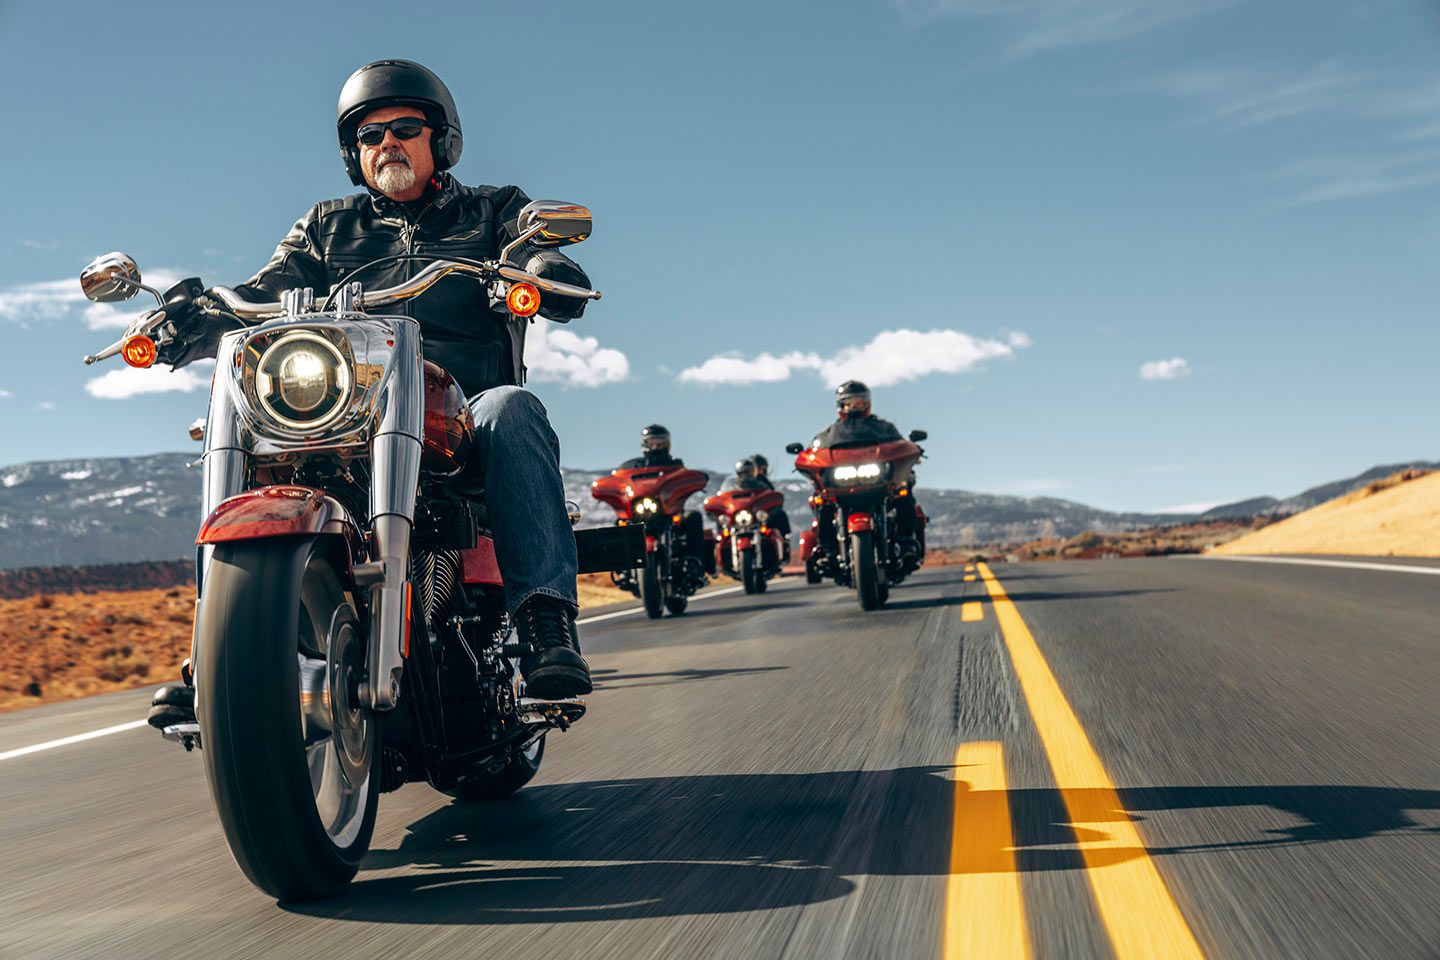 Harley’s 2023 Anniversary lineup on the road; look close, and you'll spot the Street Glide Special’s batwing fairing and LED headlamp to the immediate right of the Anniversary edition Fat Boy in the lead.